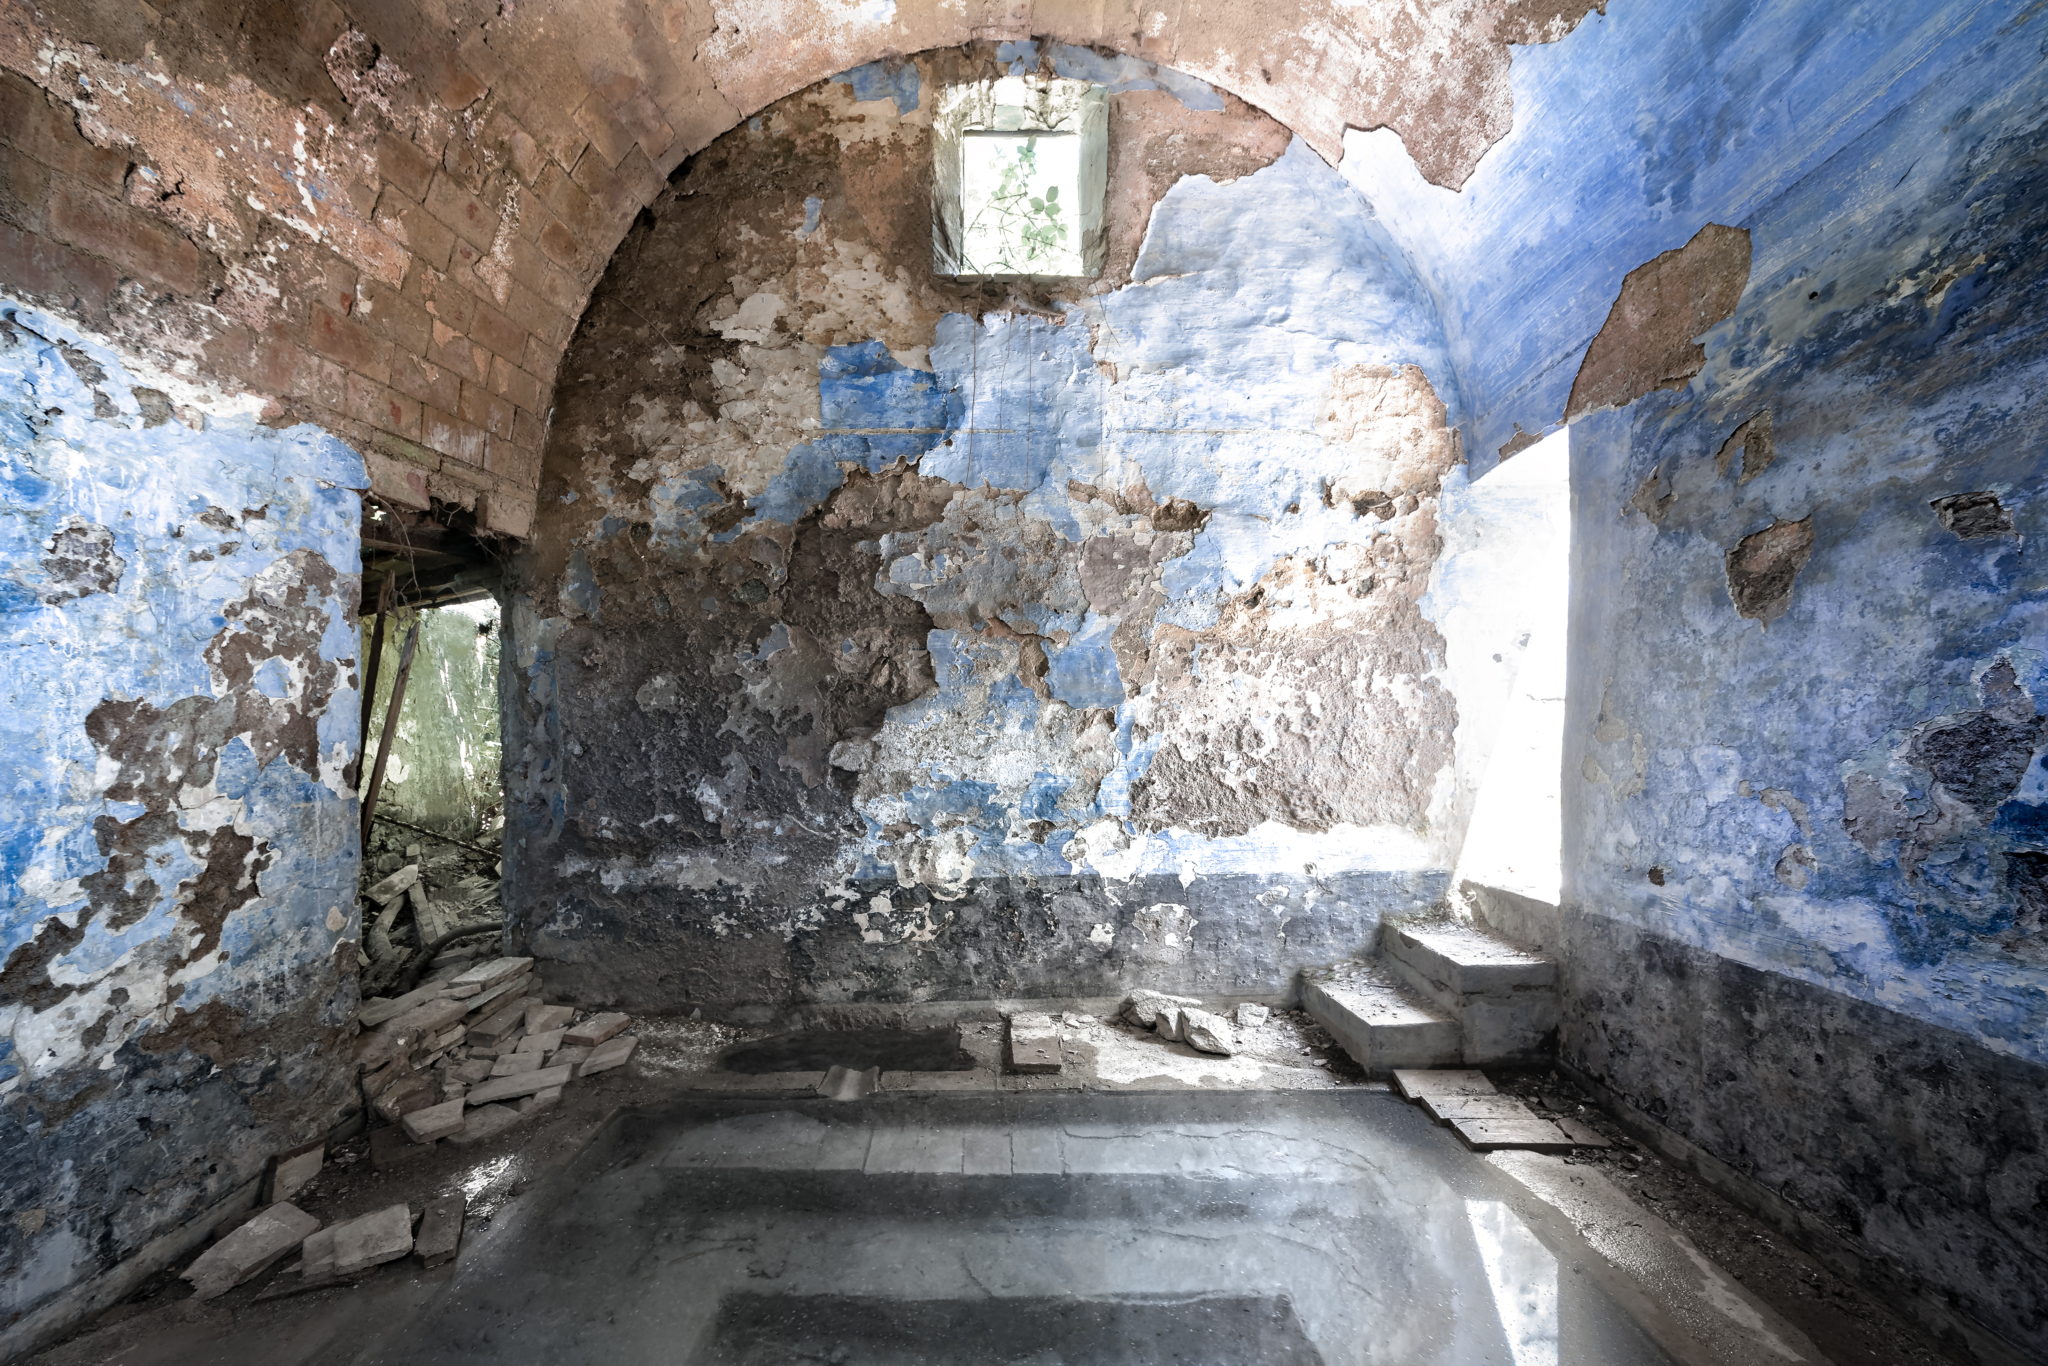 Old forgotten decaying baths in Italy